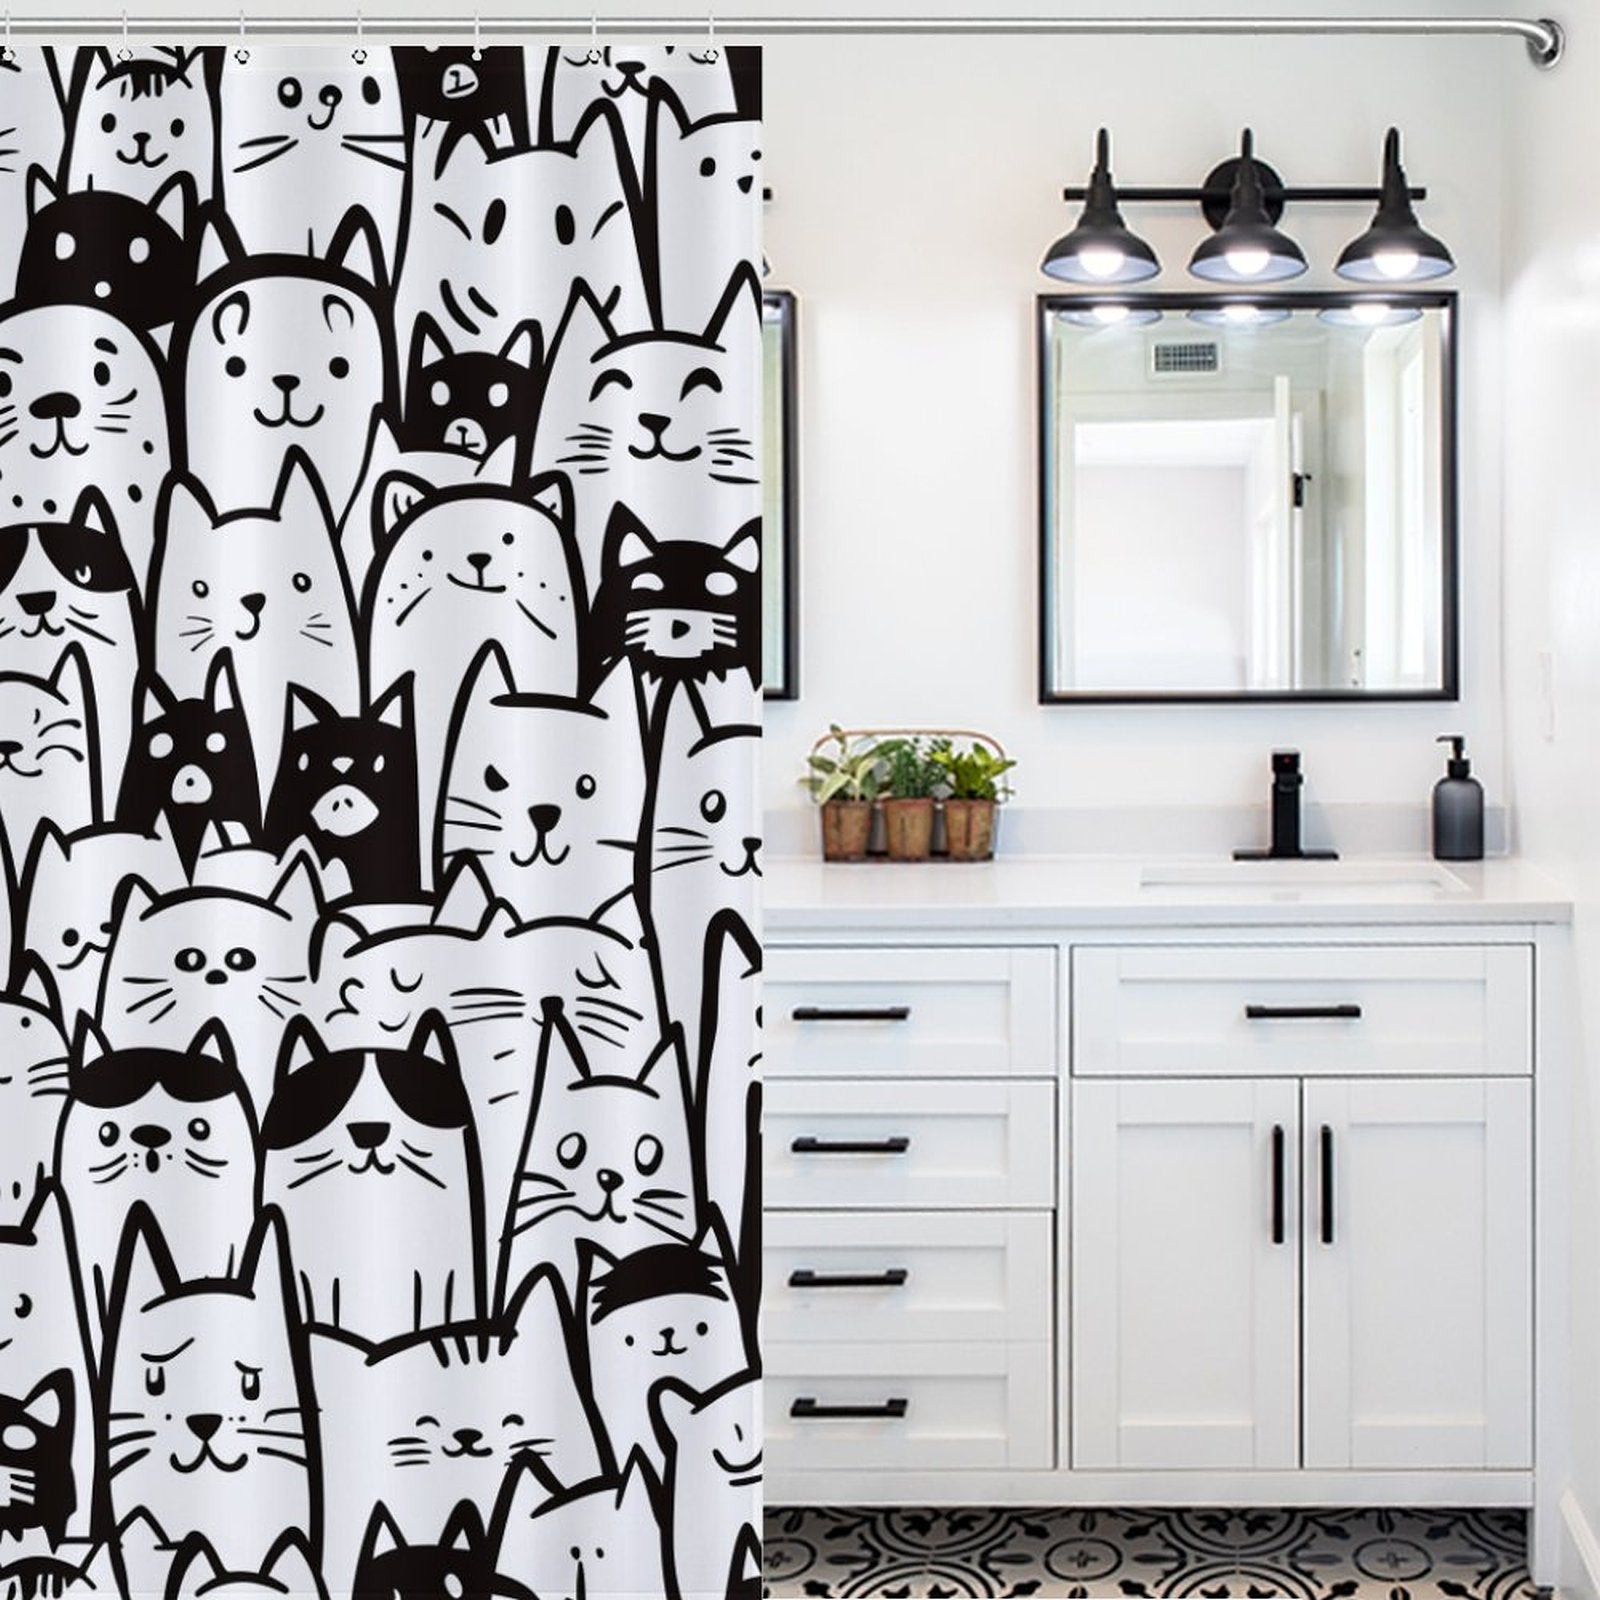 Cute Black and White Cat Shower Curtain